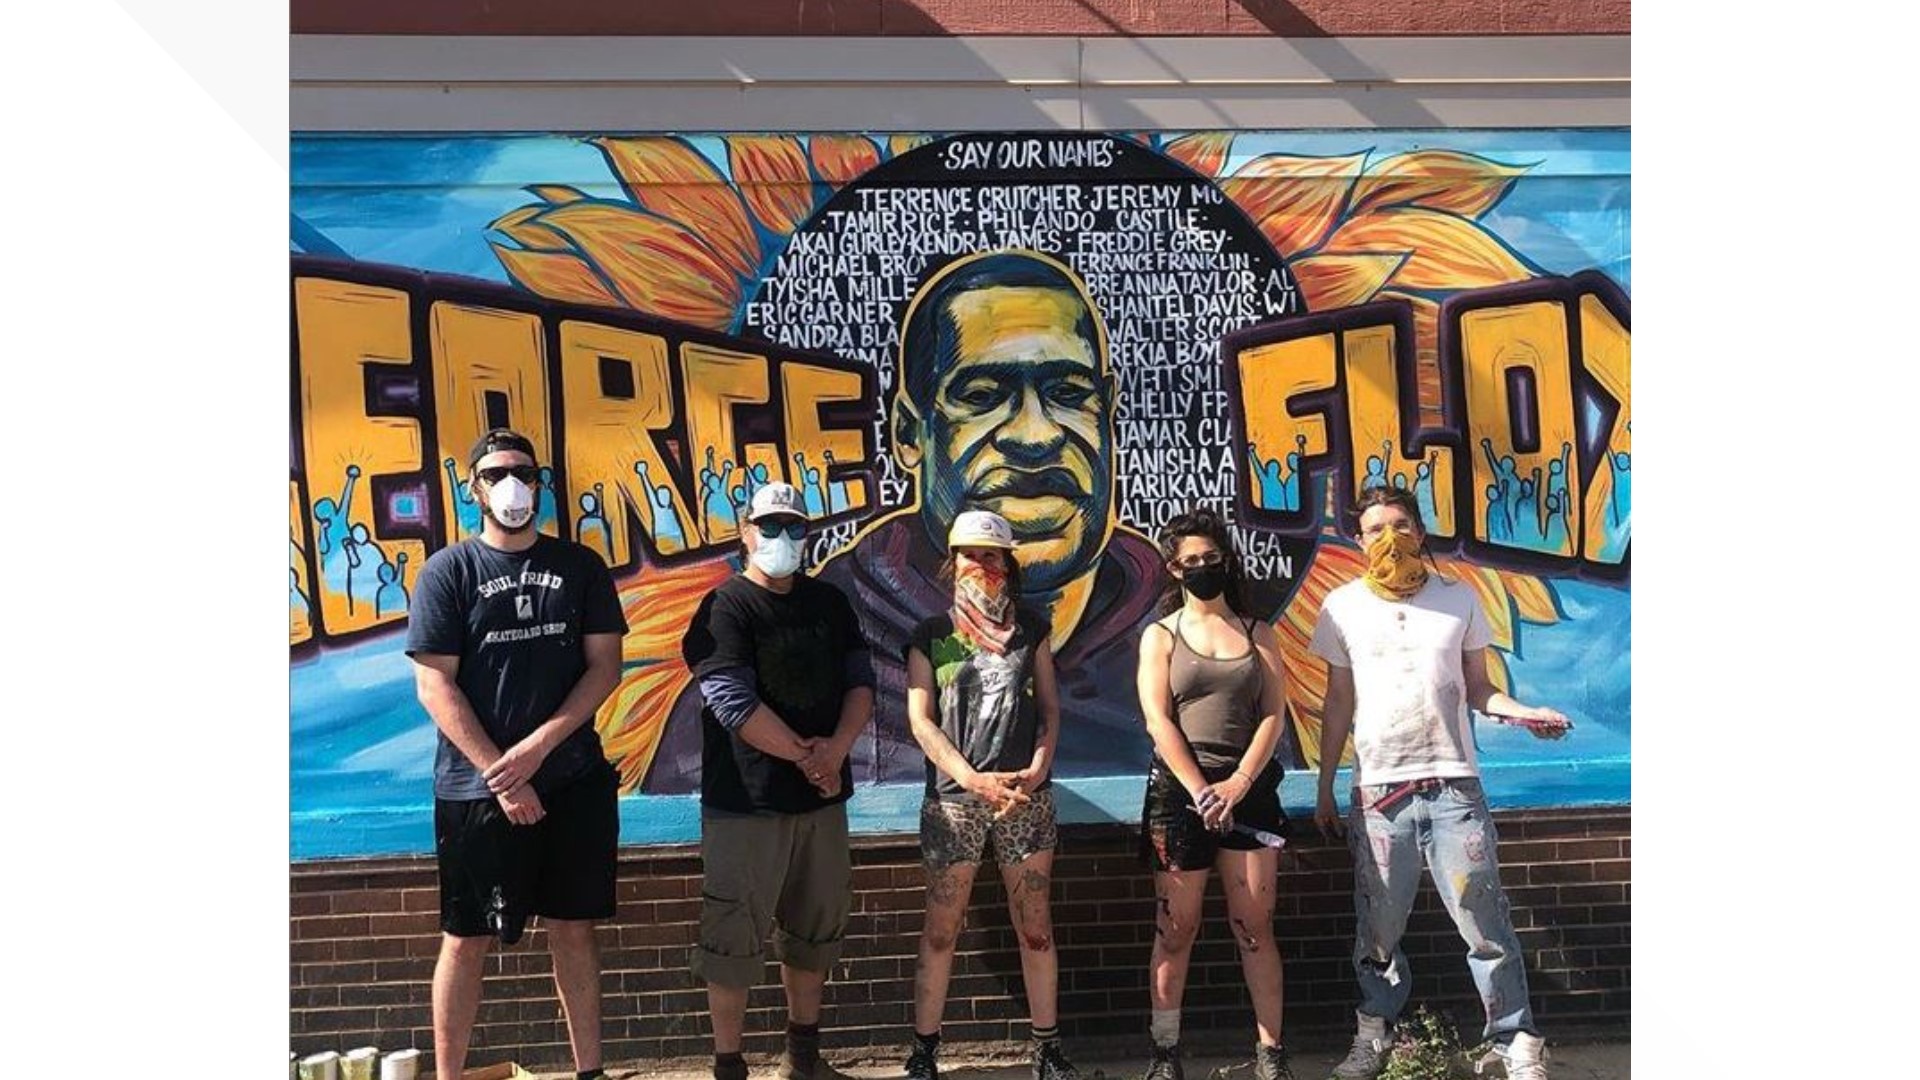 Cadex Herrrera is an artist, art educator, and intervention specialist for the St. Paul public school district. He designed the George Floyd mural in Minneapolis, MN